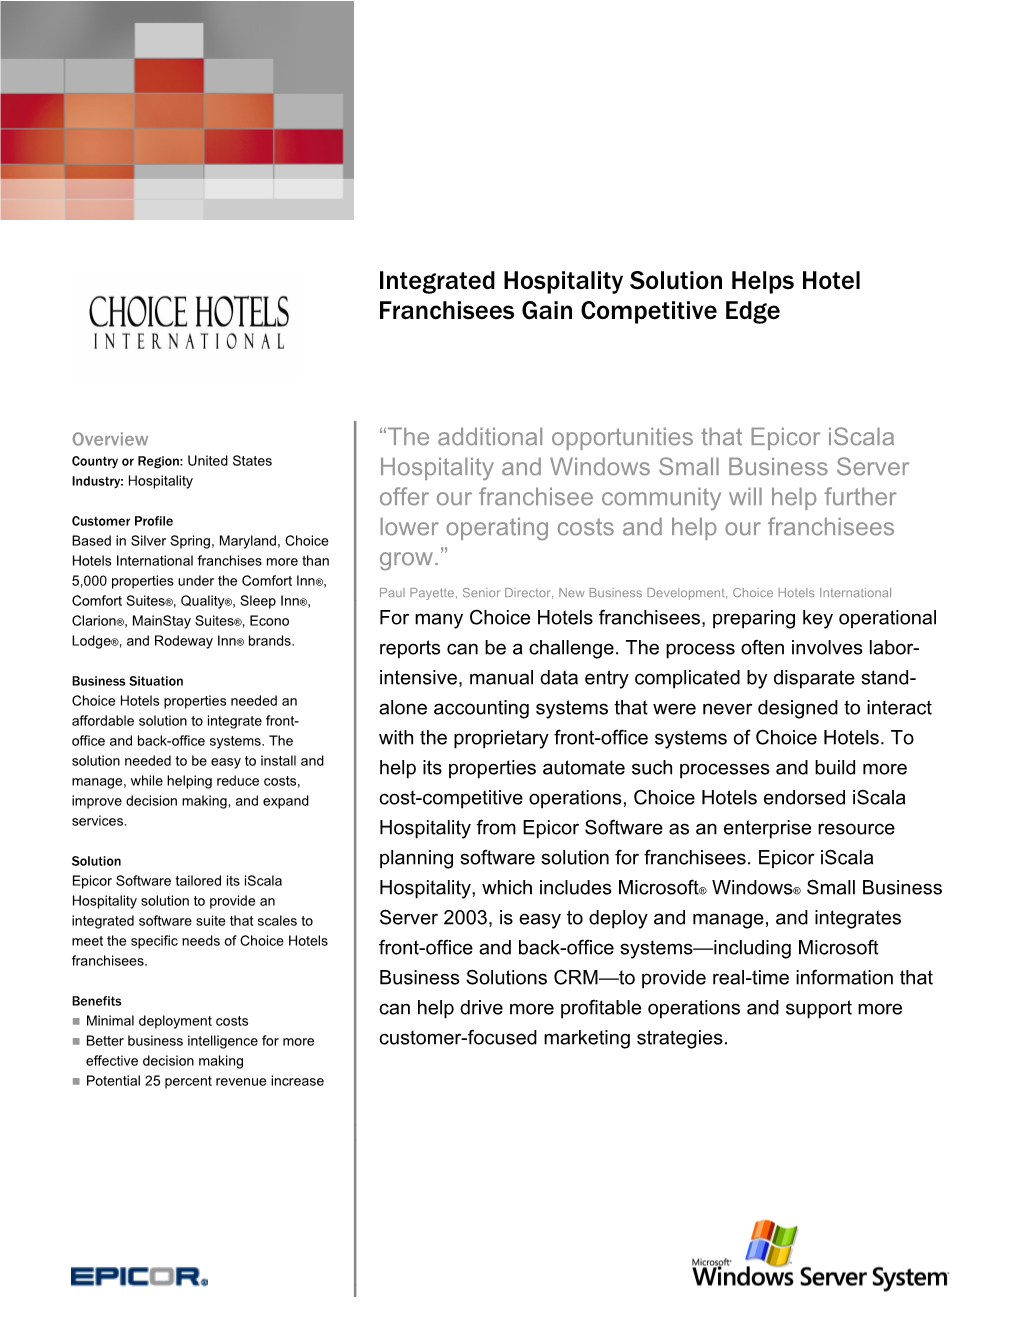 Integrated Hospitality Solution Helps Hotel Franchisees Gain Competitive Edge